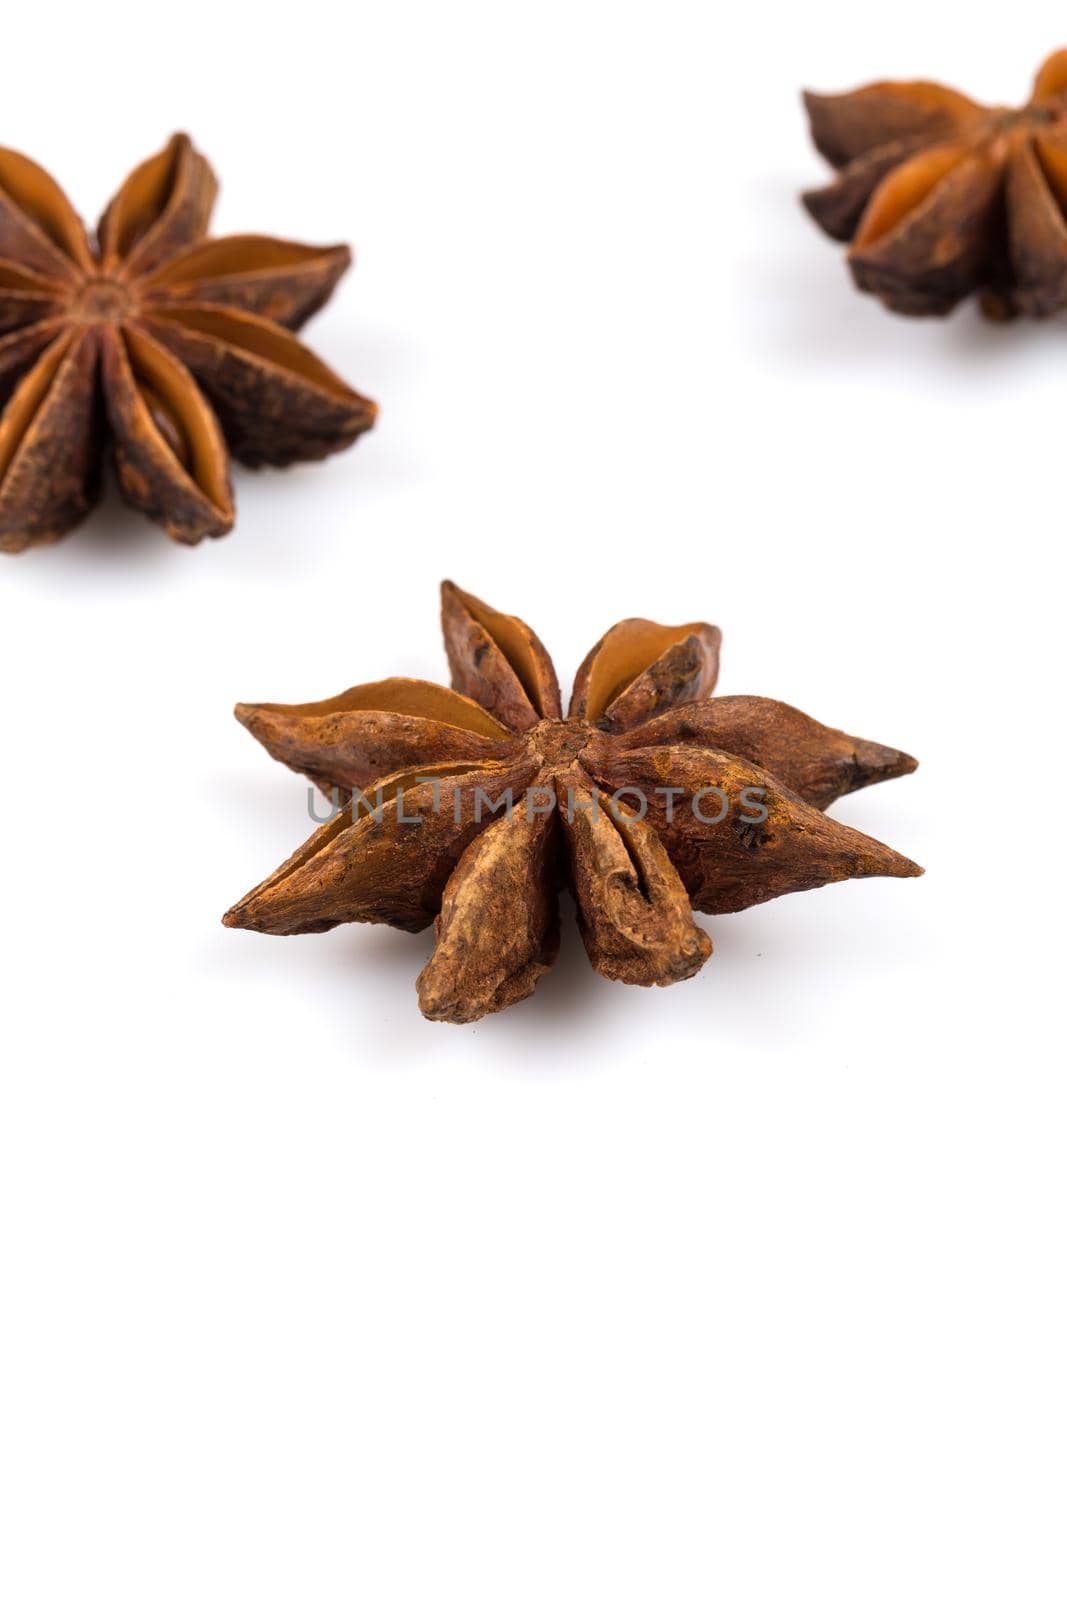 Stars anise  by RTsubin